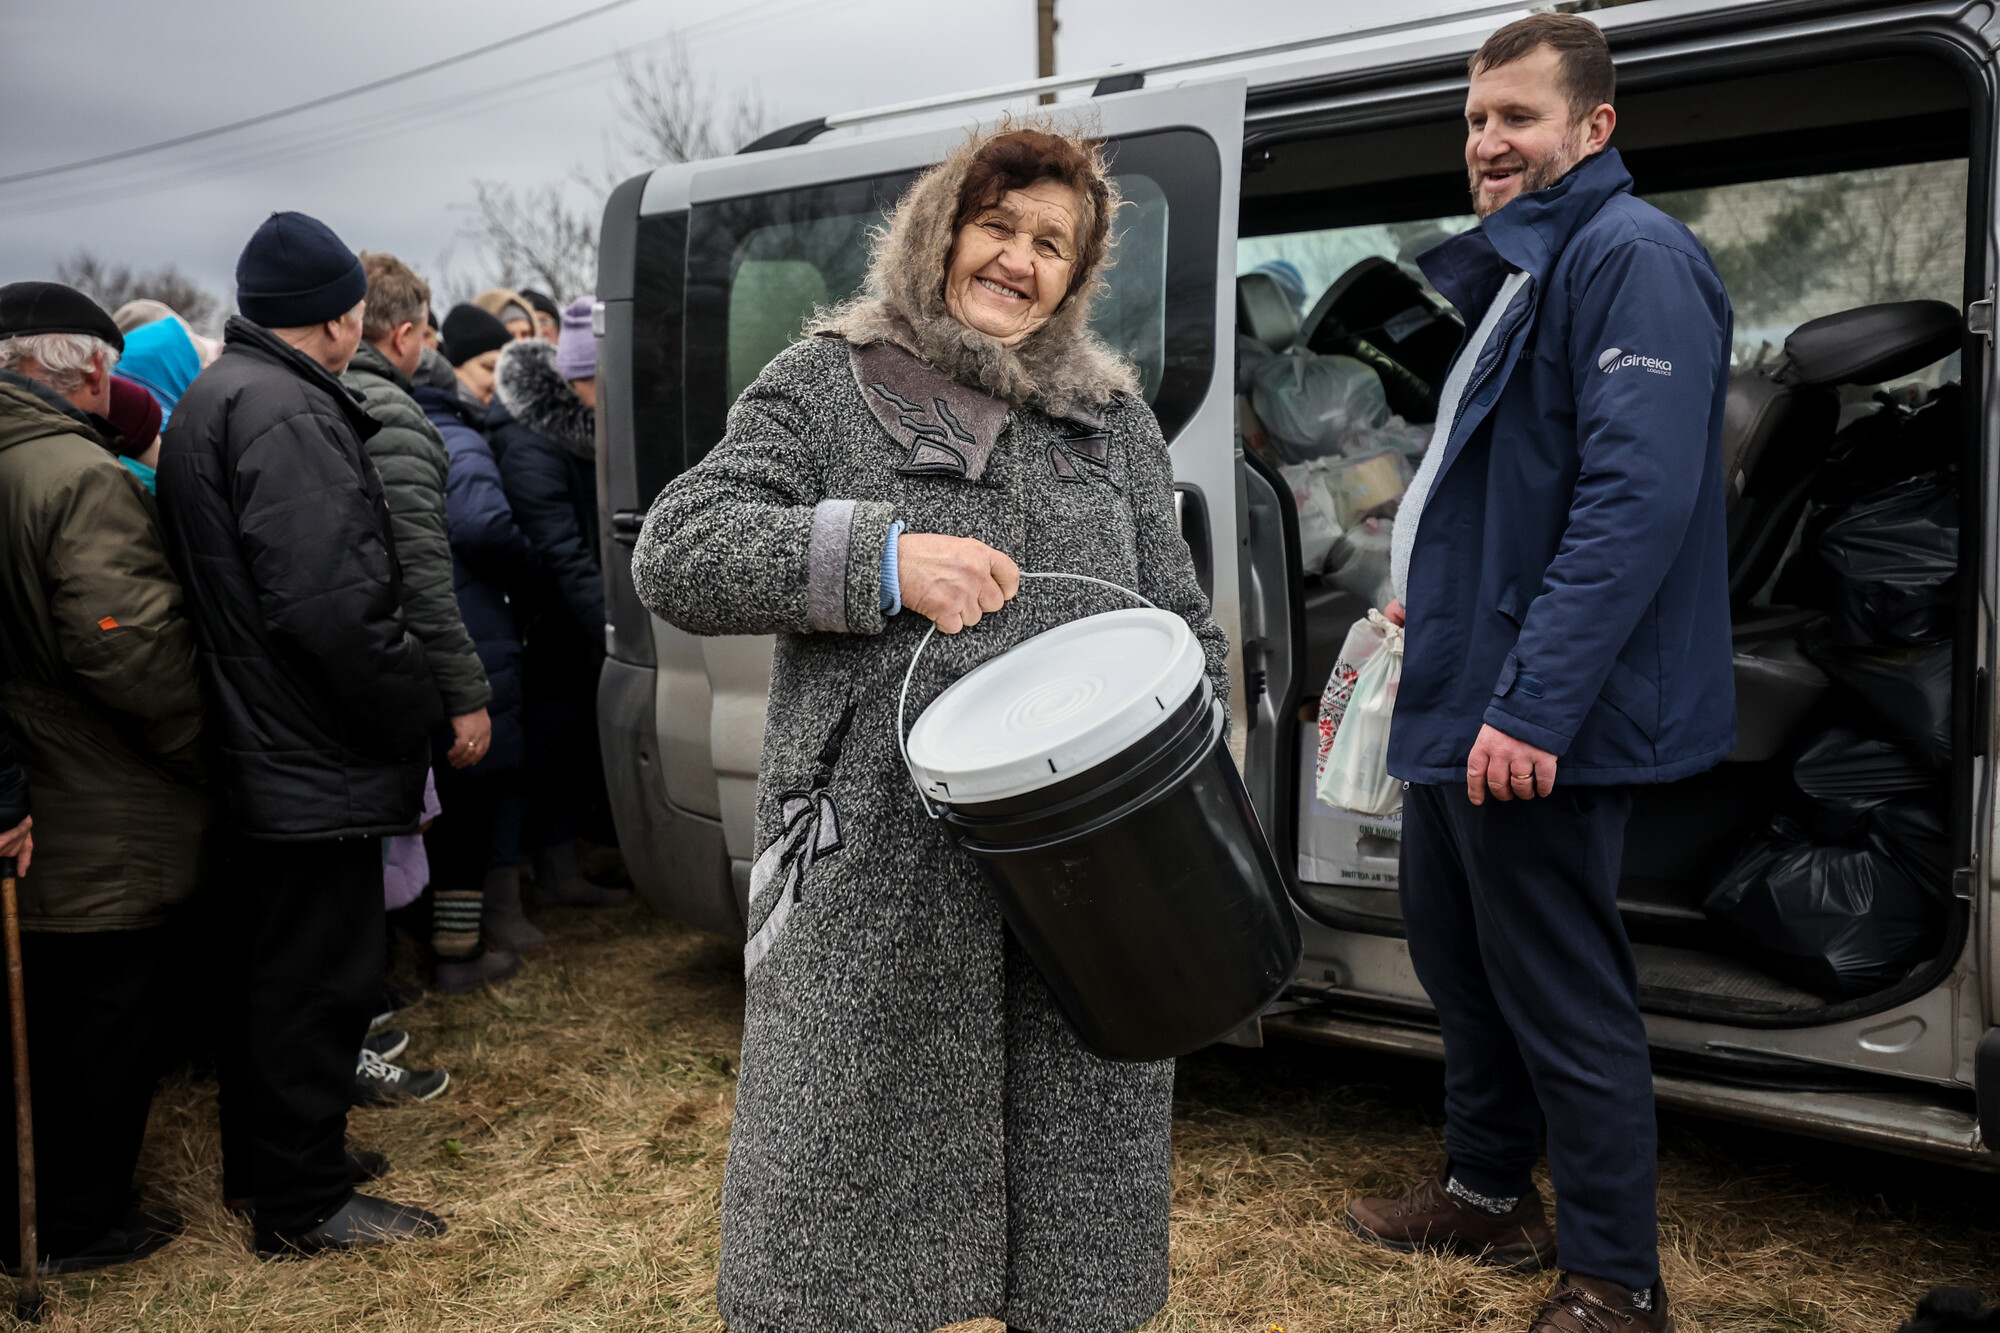 A woman in a winter coat holds up a five gallon bucket and smiles at the camera.